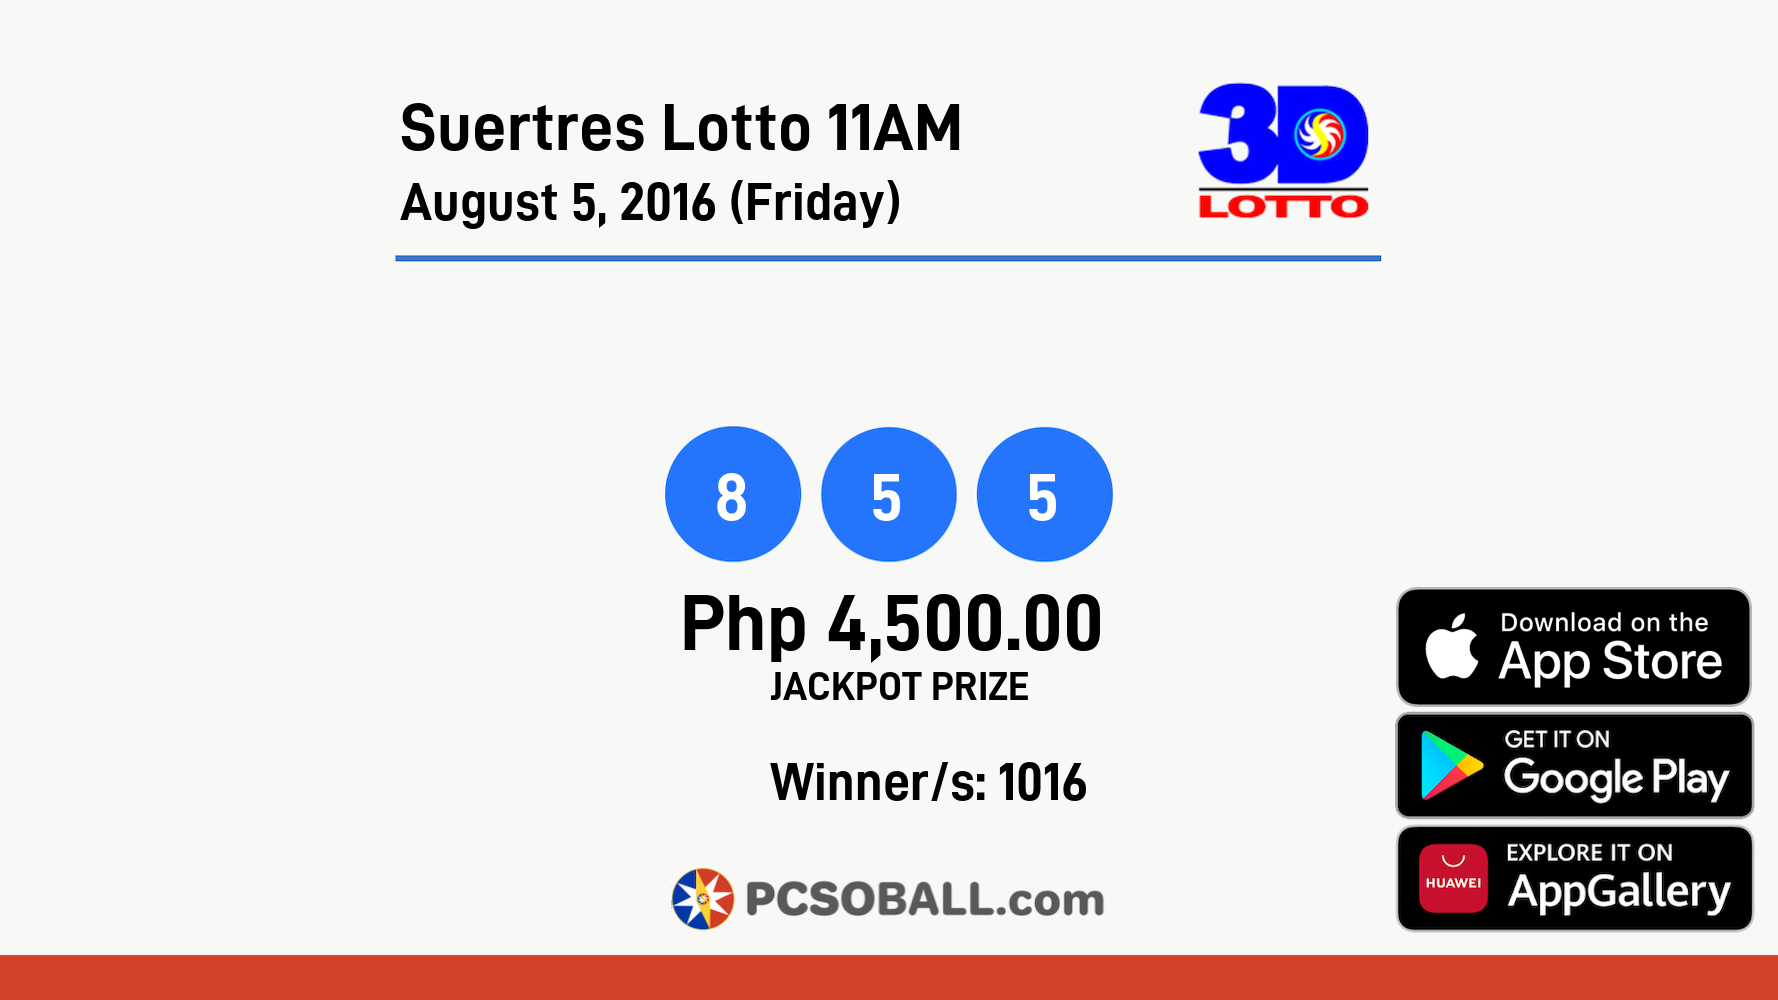 Suertres Lotto 11AM August 5, 2016 (Friday) Result